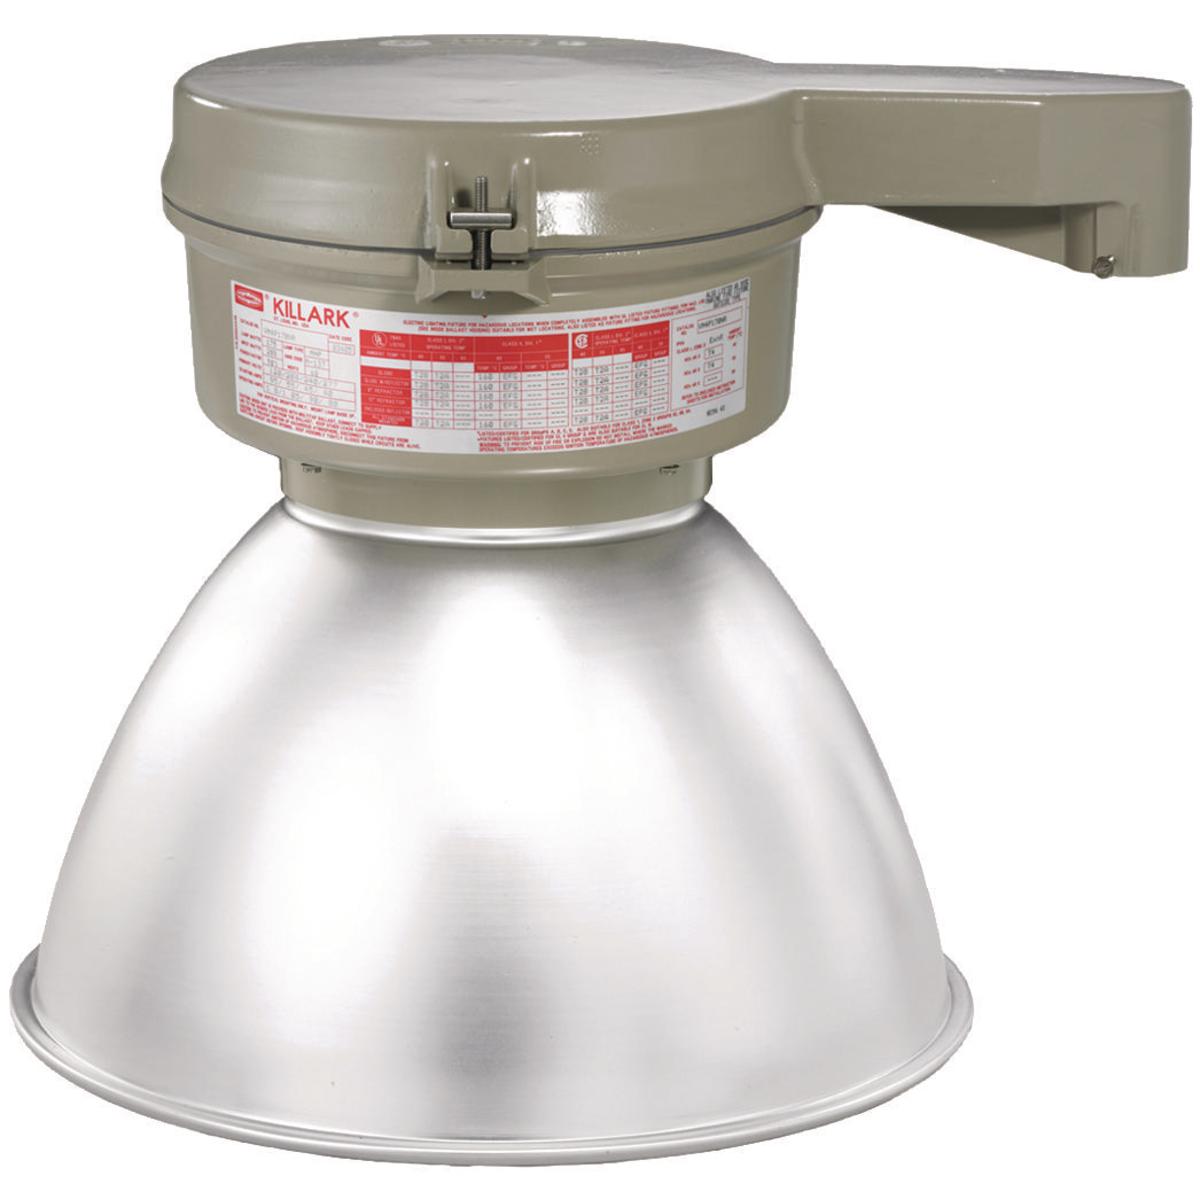 Hubbell VM4H100S5ERN VM4 Series - 100W Metal Halide Quadri-Volt - 1-1/2" Stanchion Mount - Enclosed Reflector  ; Ballast tank and splice box – corrosion resistant copper-free aluminum alloy with baked powder epoxy/polyester finish, electrostatically applied for complete, unif